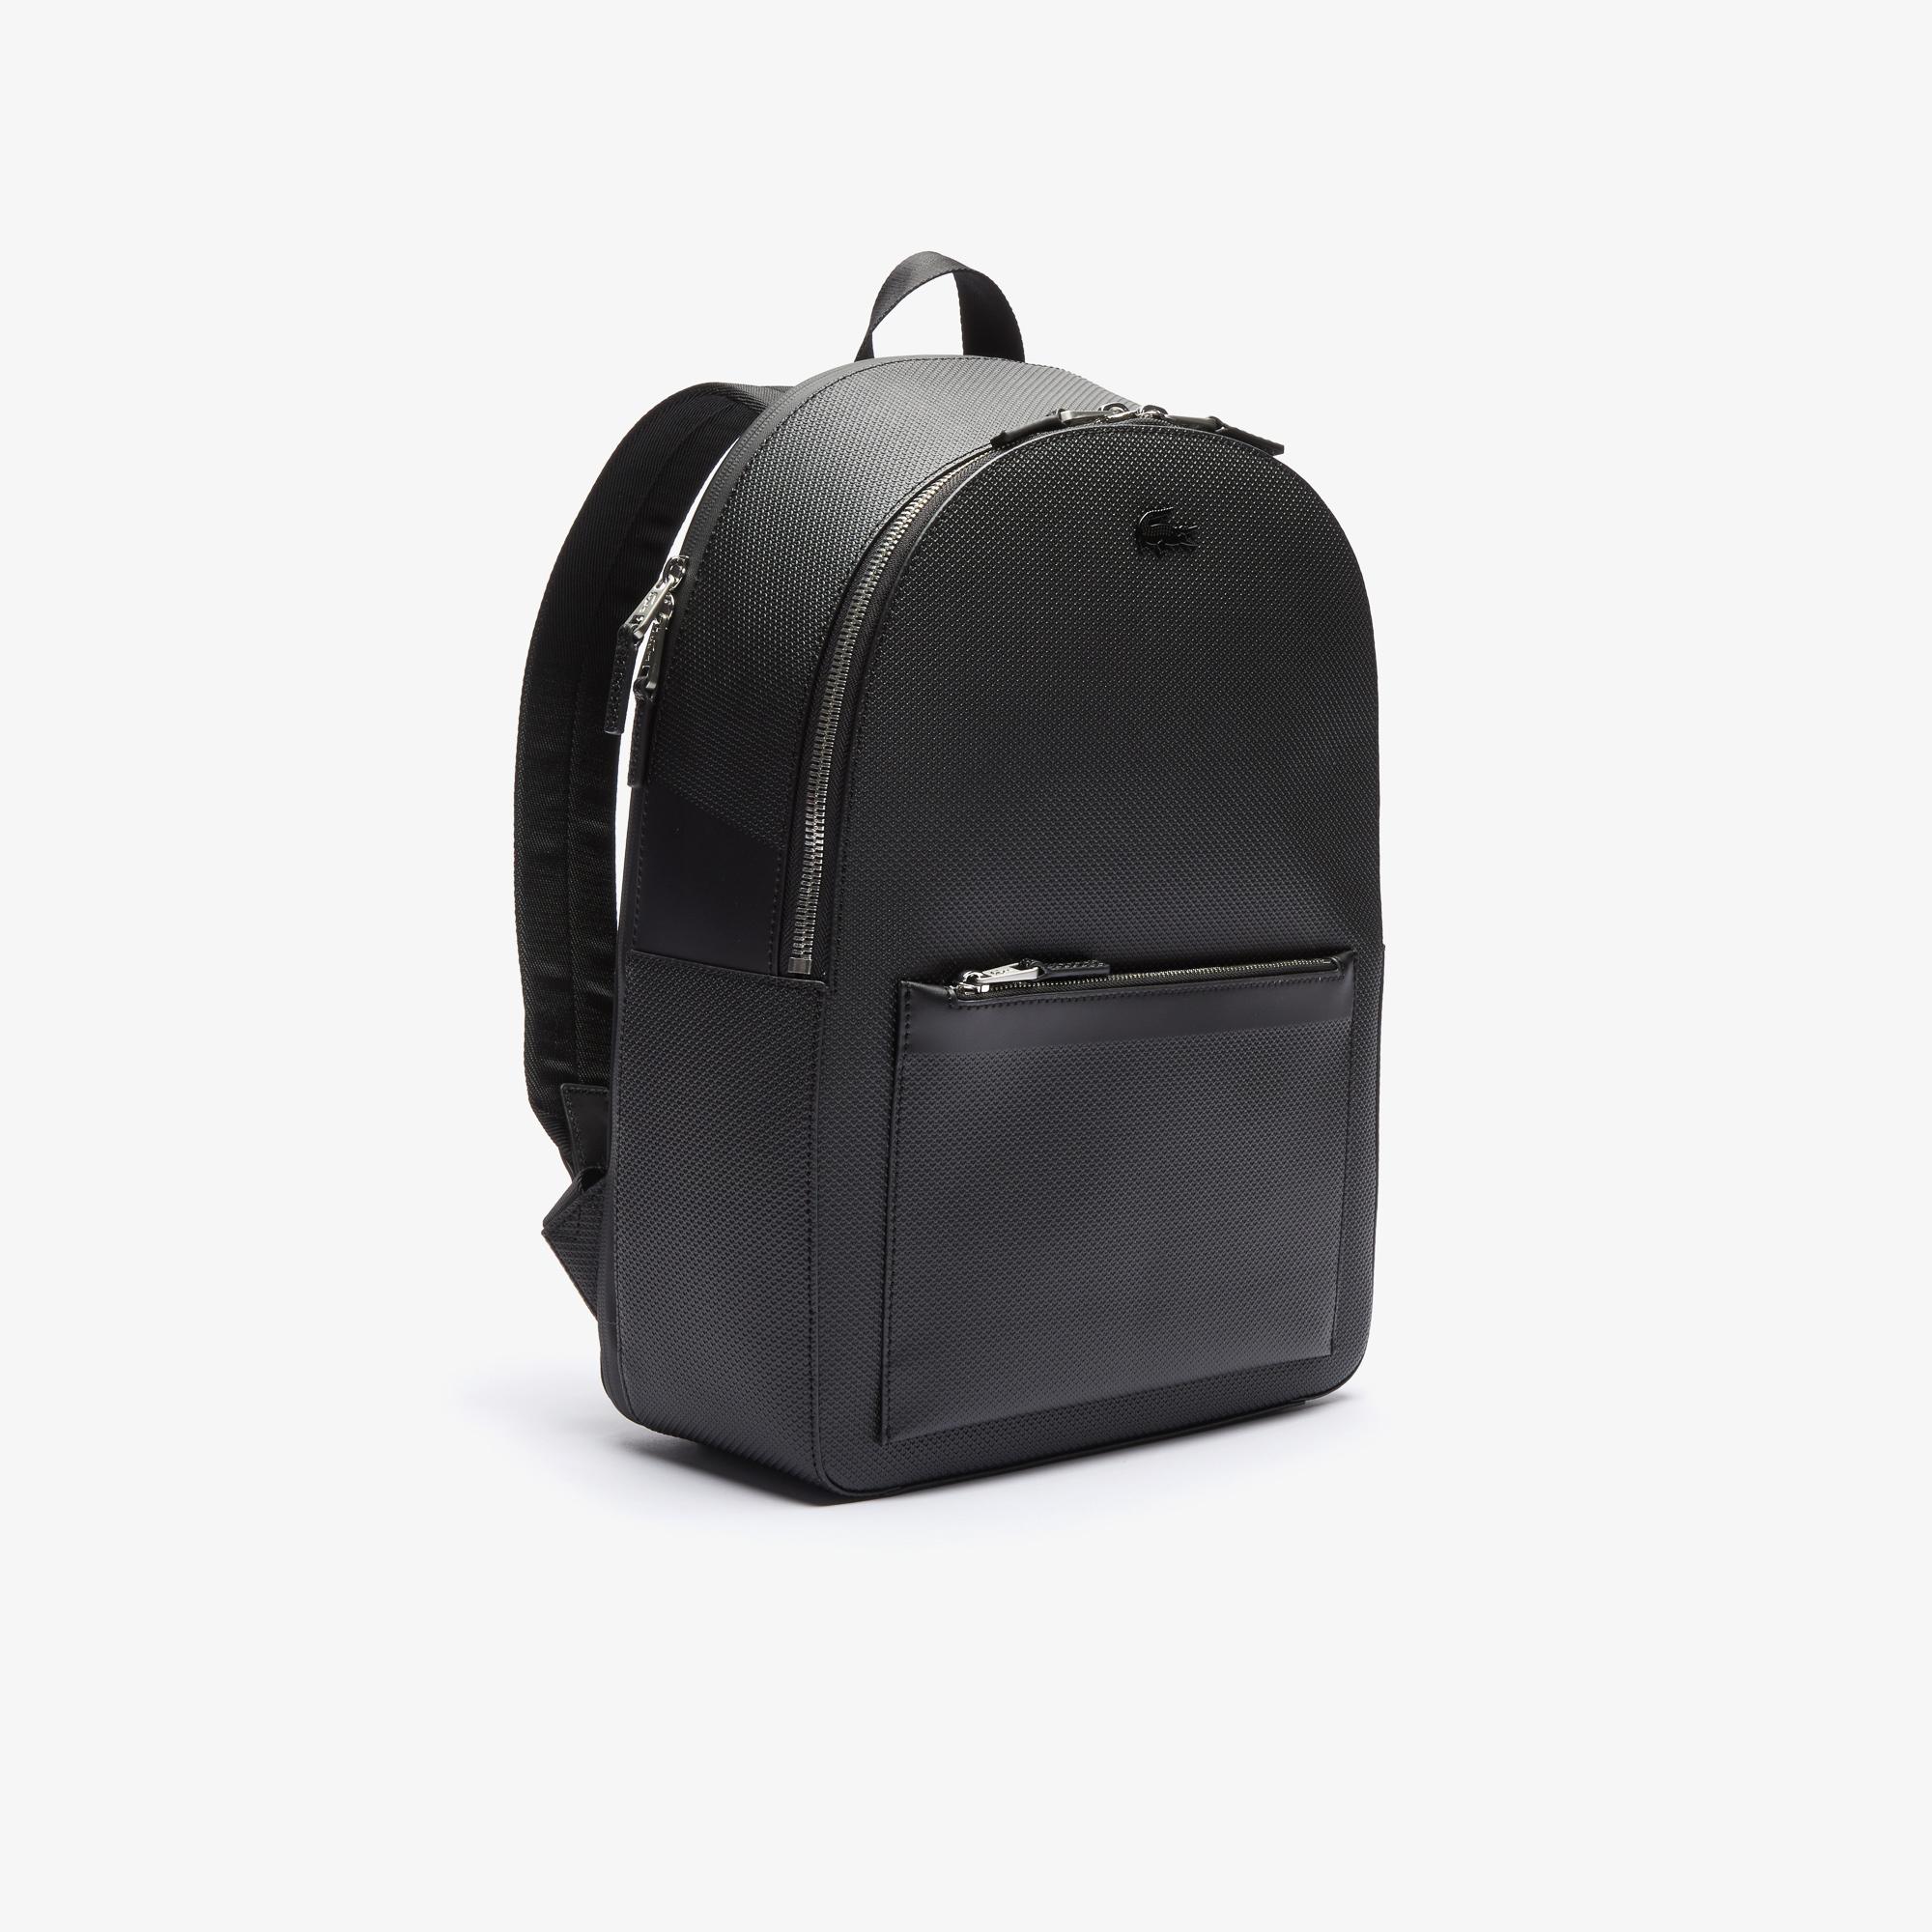 Lacoste Men's Chantaco Matte Stitched Leather Backpack